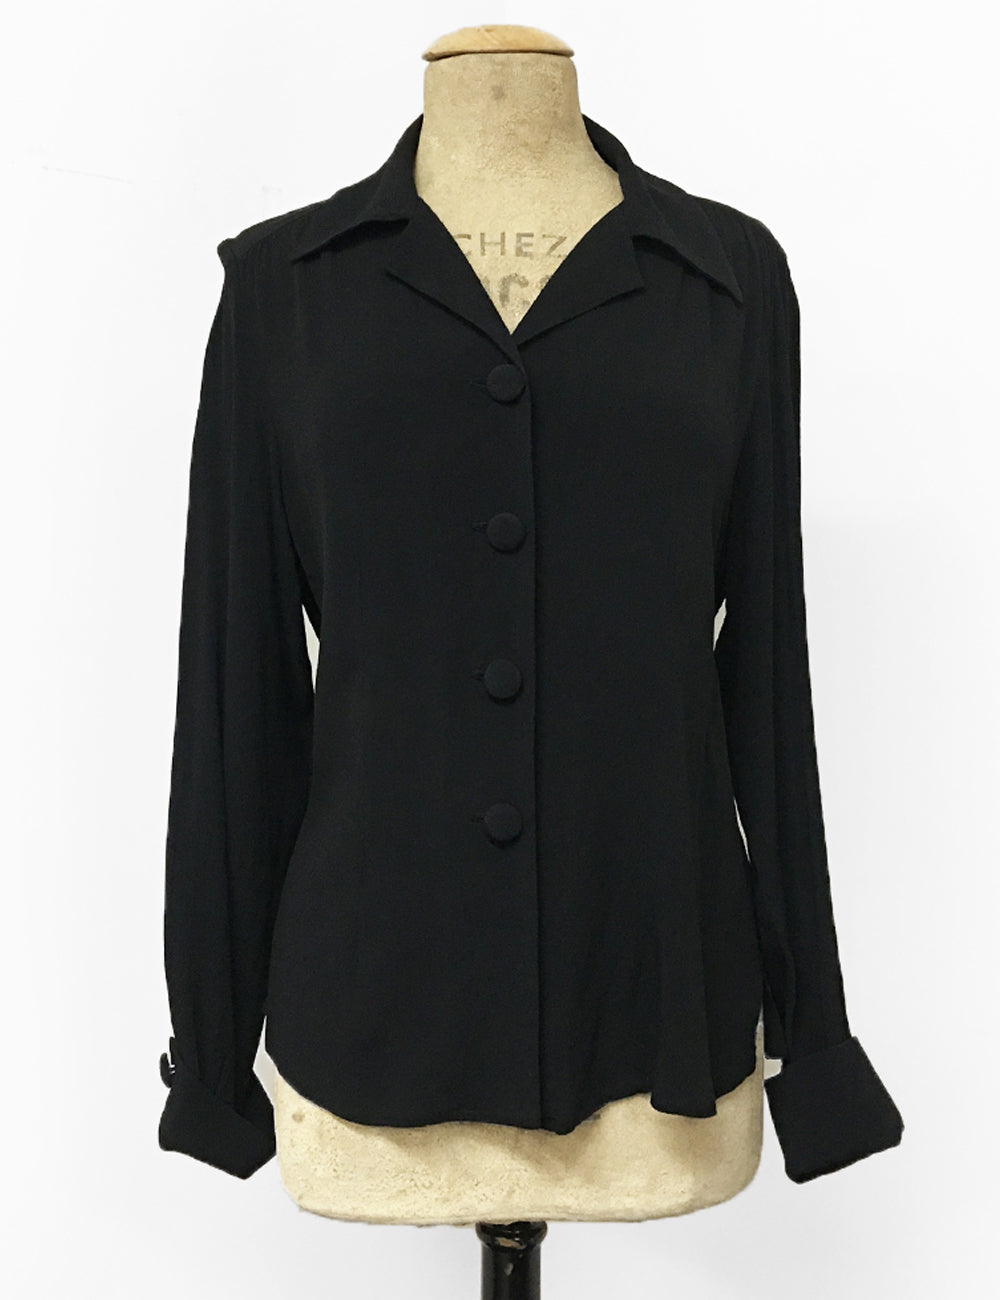 Solid Black 1940s Style Button Up Hepburn Blouse